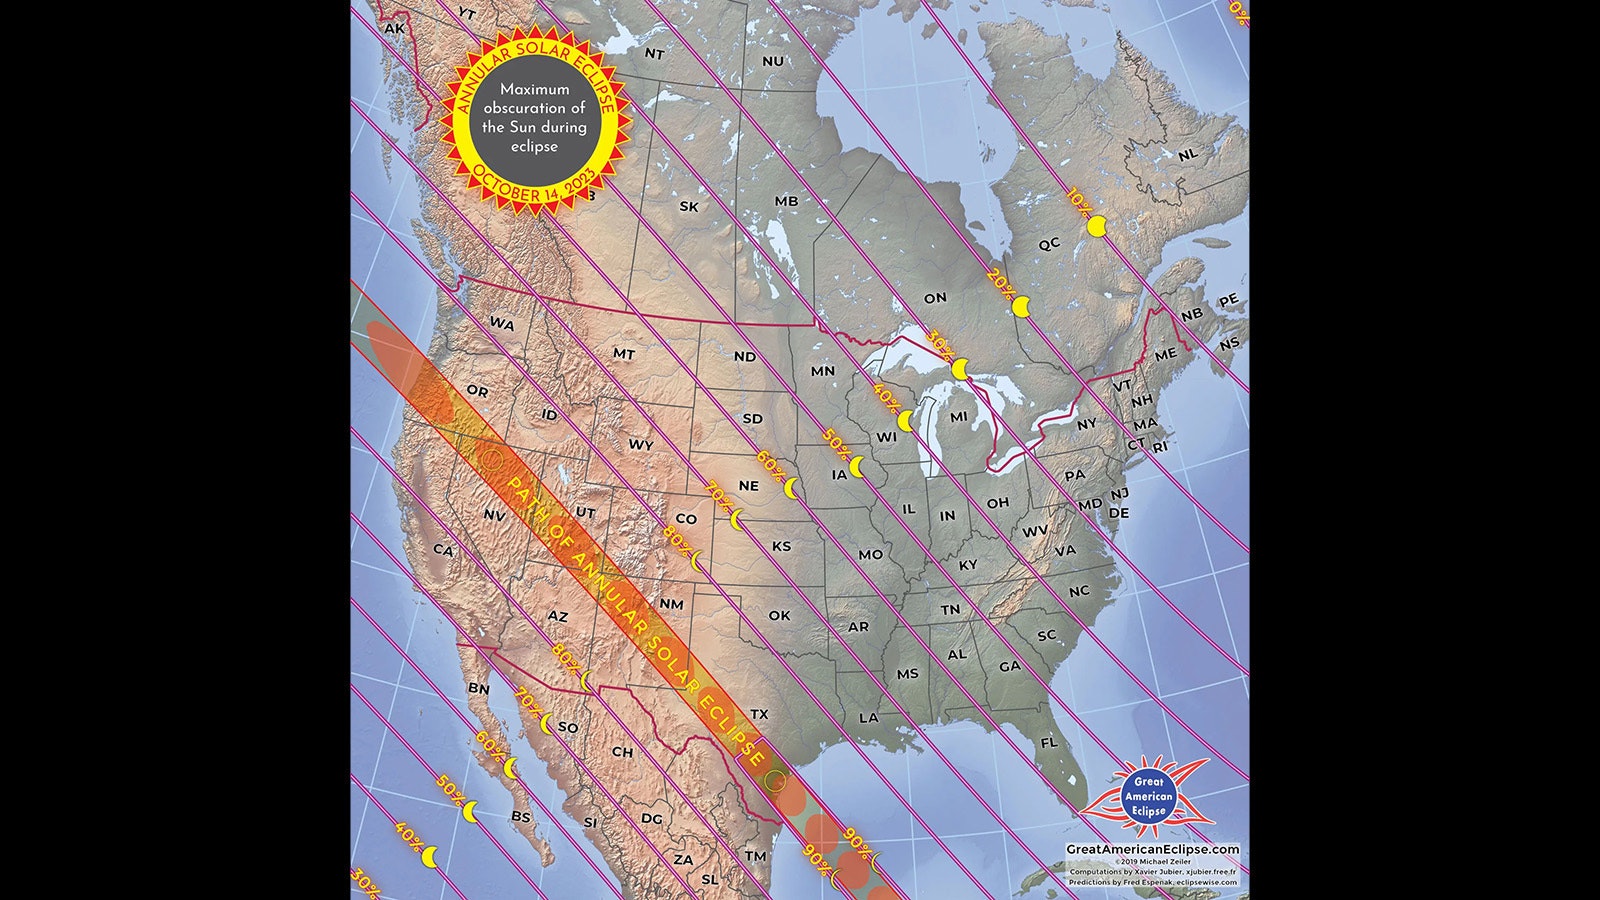 A map showing the path of annularity for the Oct. 14 annular eclipse. Like the 2017 total eclipse, only certain areas of the United States will see the annulus, "the ring of fire," since the moon is too far from Earth to fully cover the sun. Nobody in Wyoming will see the full experience without traveling.